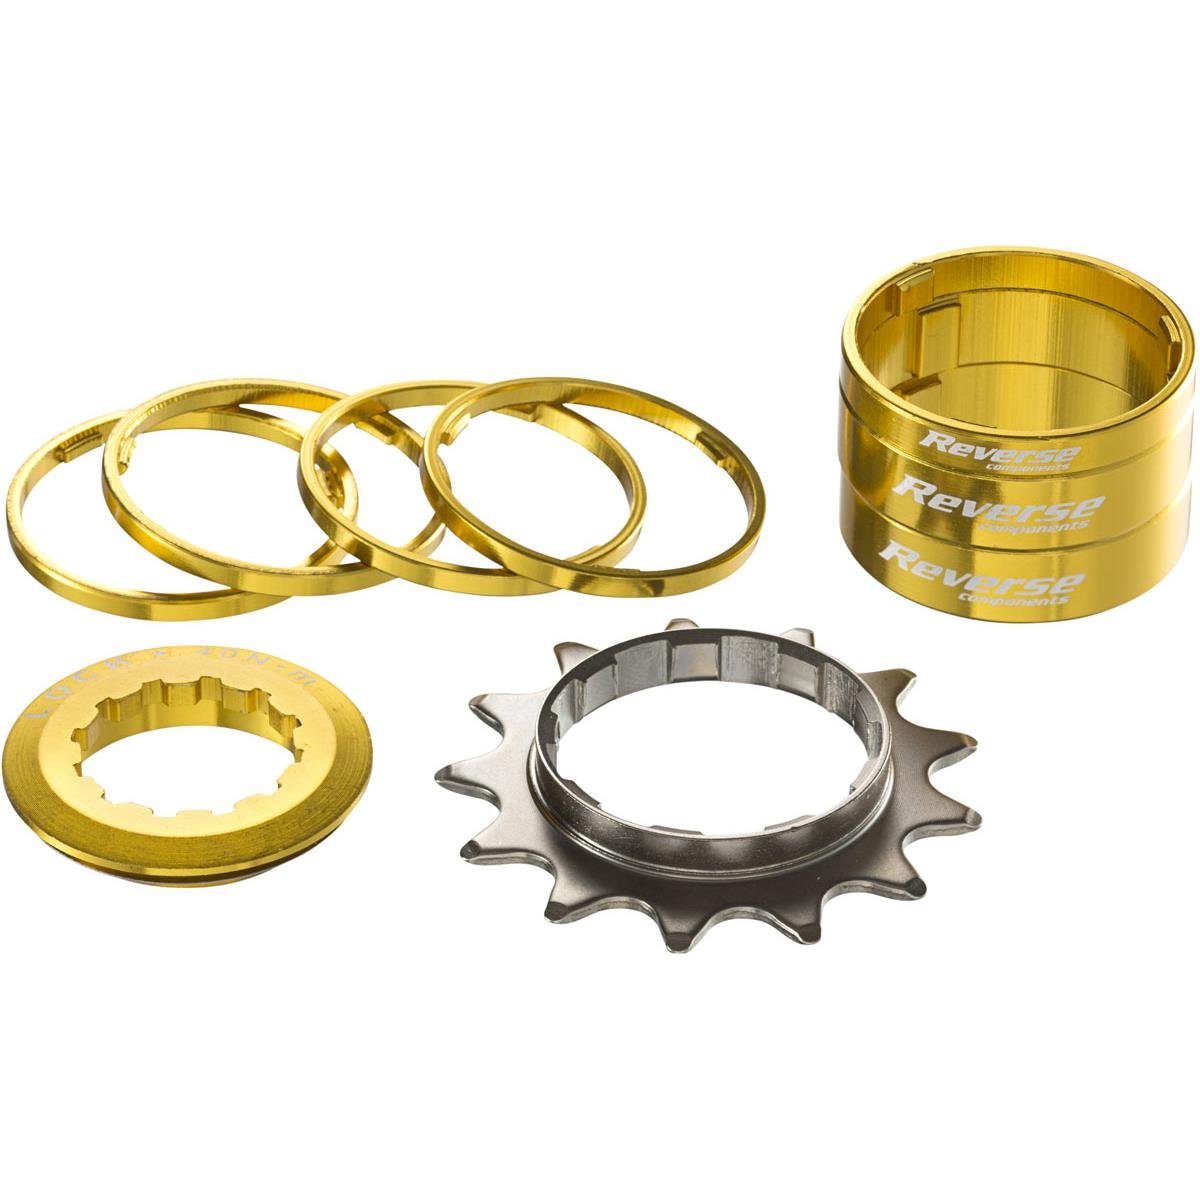 Reverse Components Singlespeed Conversion Kit  Gold, 13 Teeth